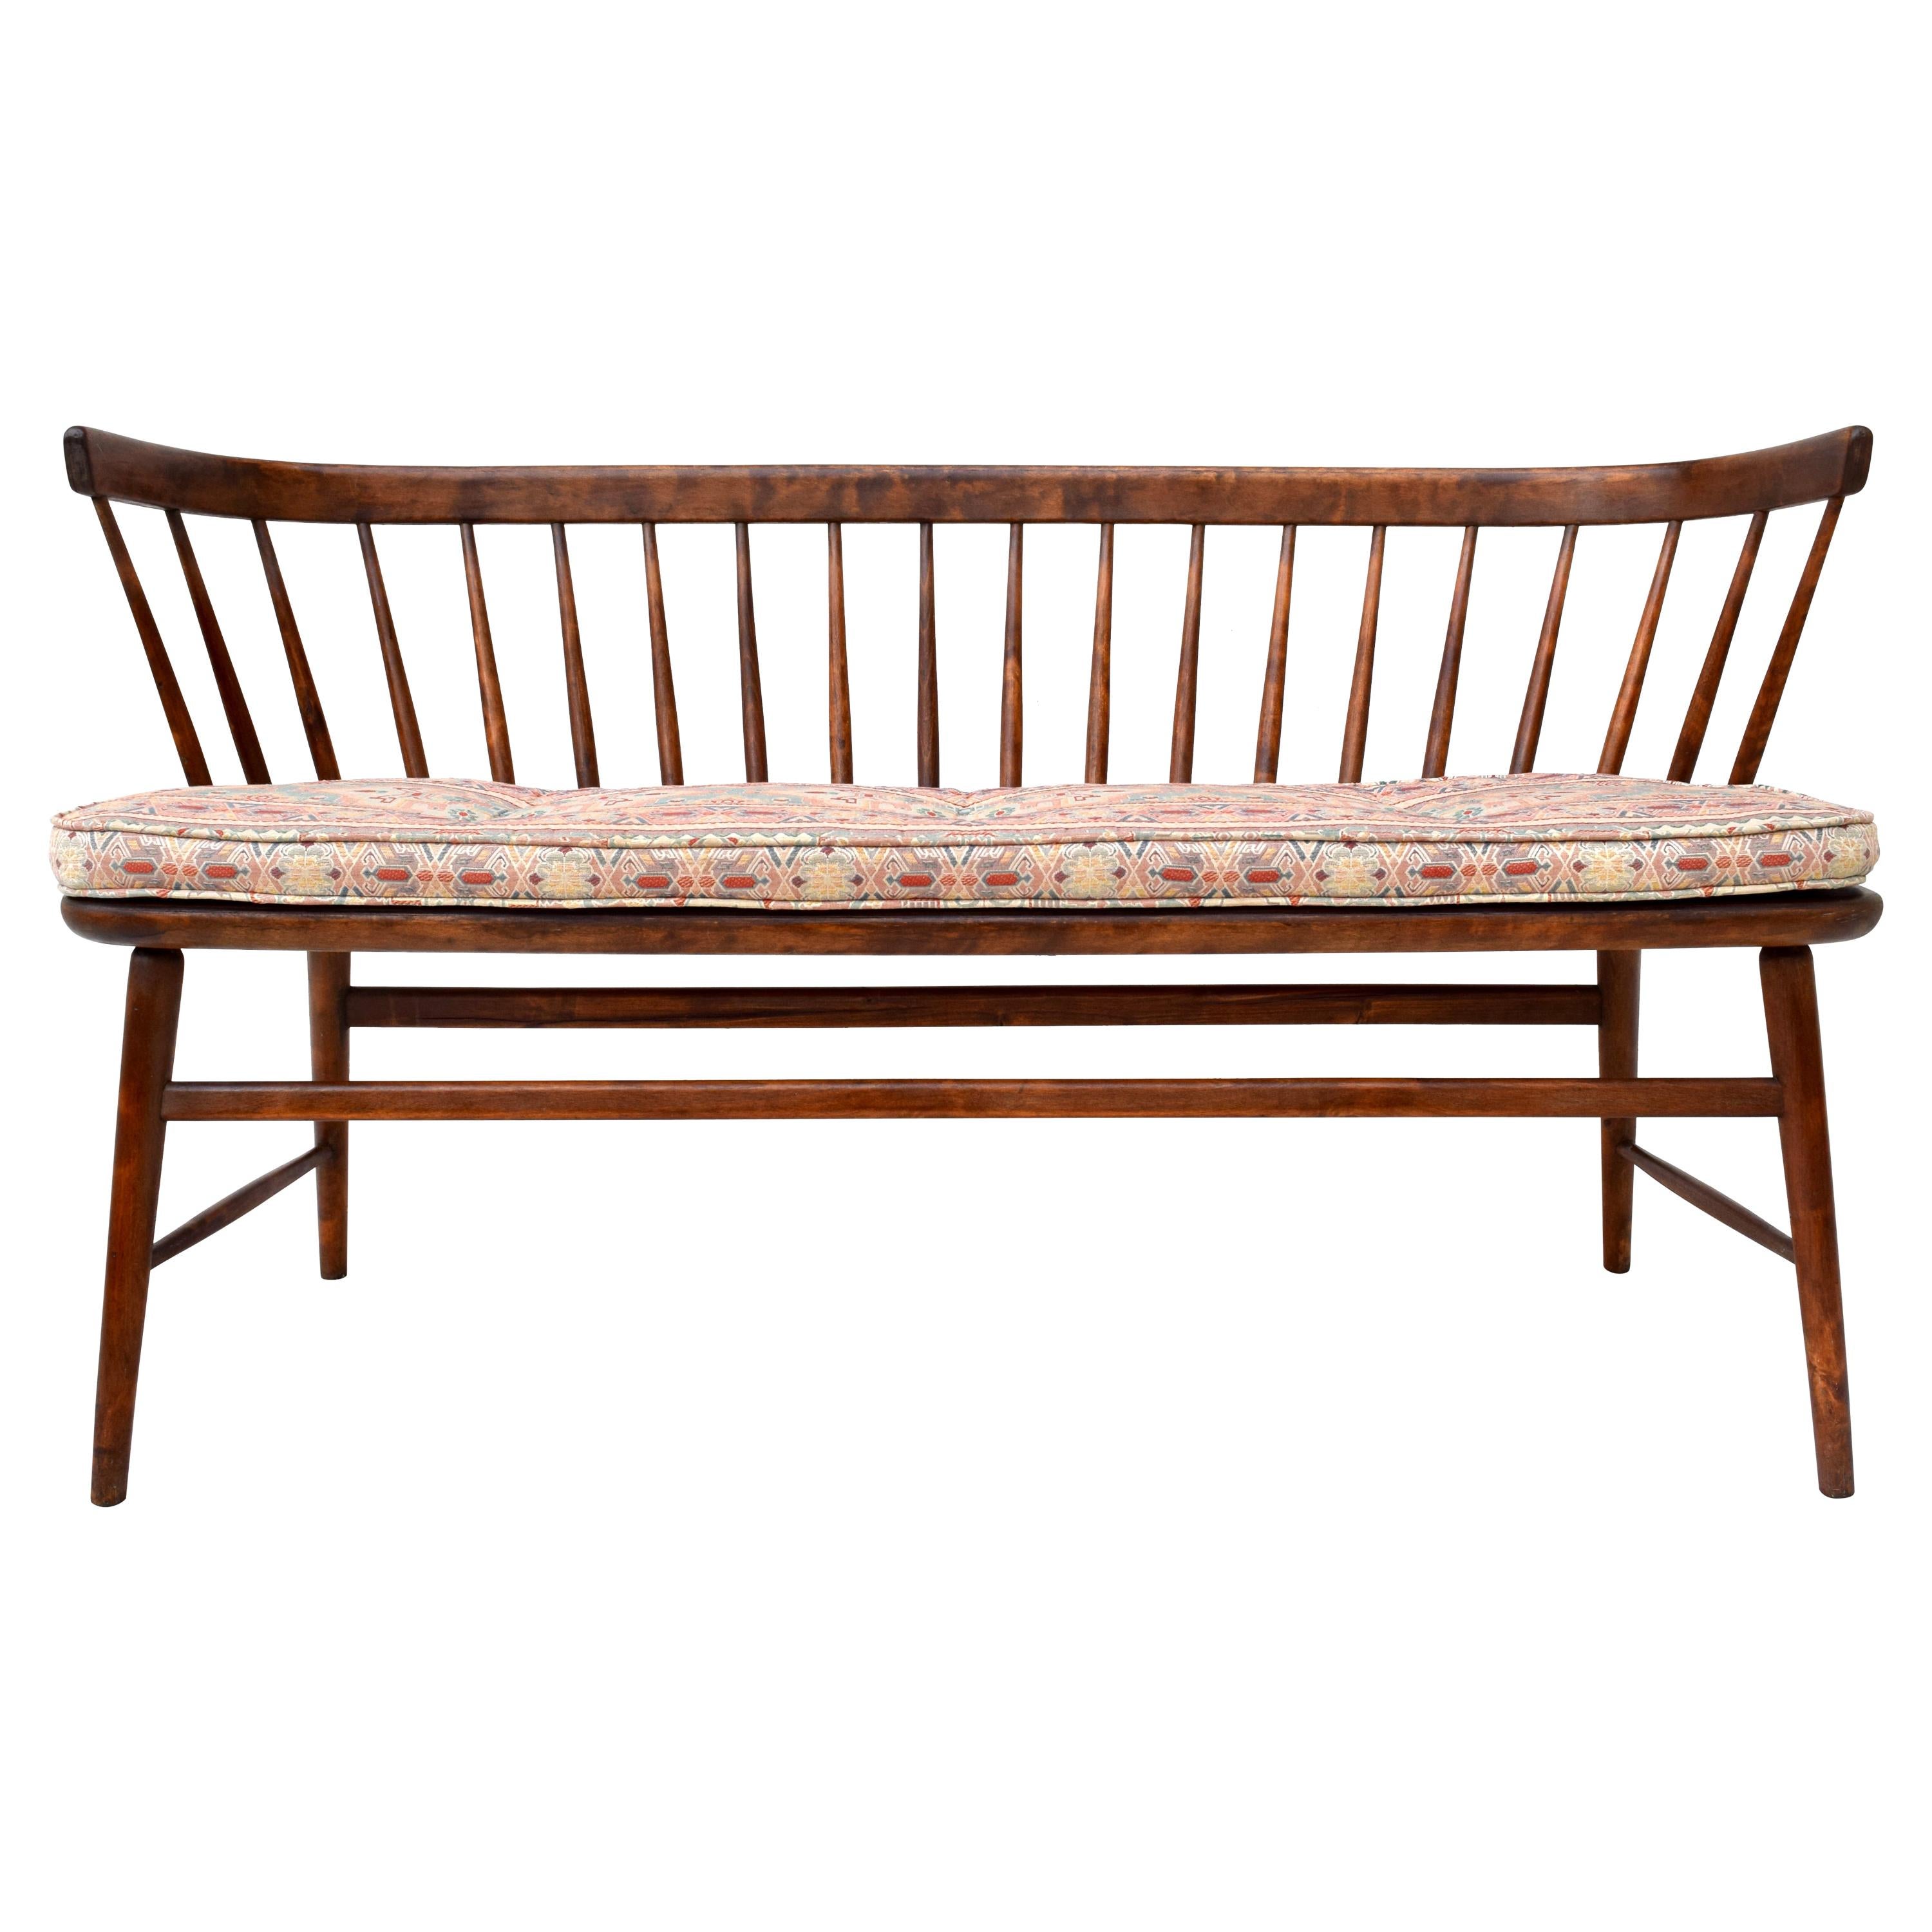 Danish Mid-Century Modern Spindle Back Settee Bench